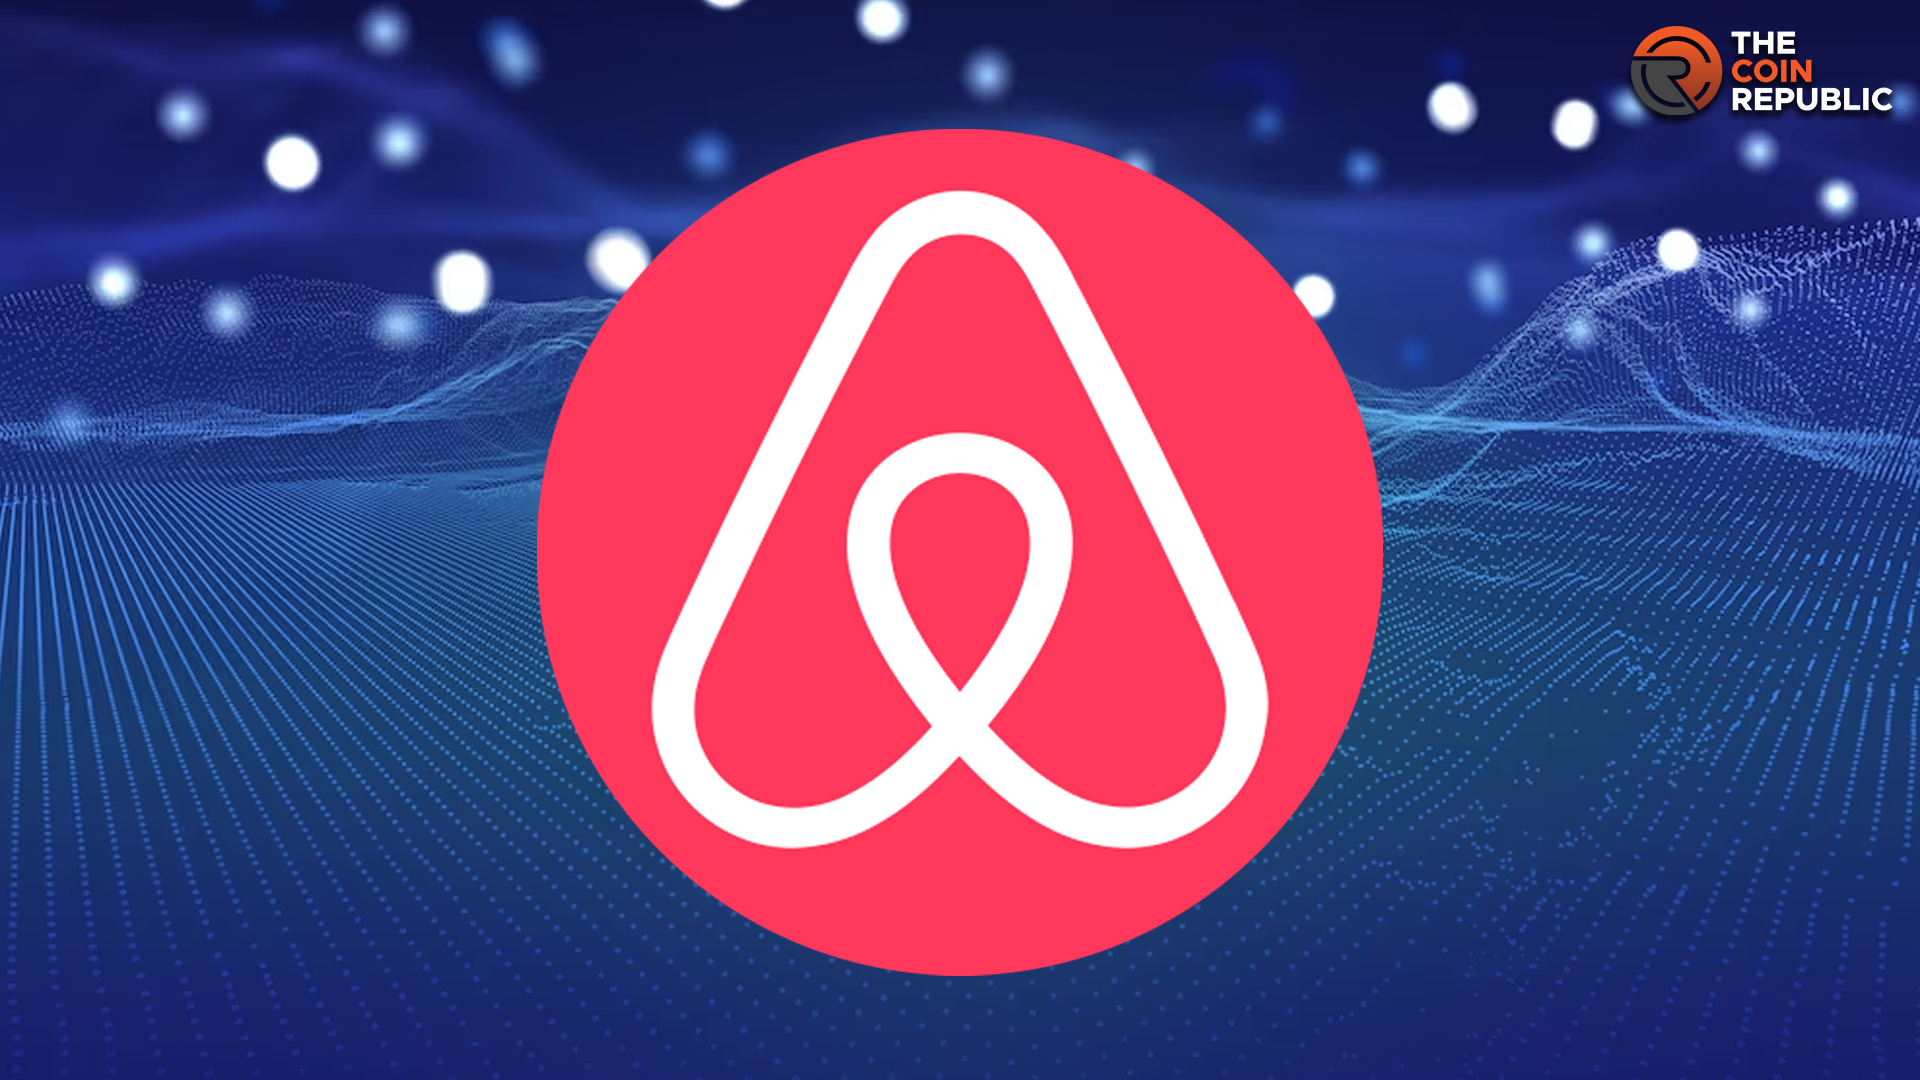 ABNB Stock Price Prediction: Can Airbnb Price Touch New Highs?